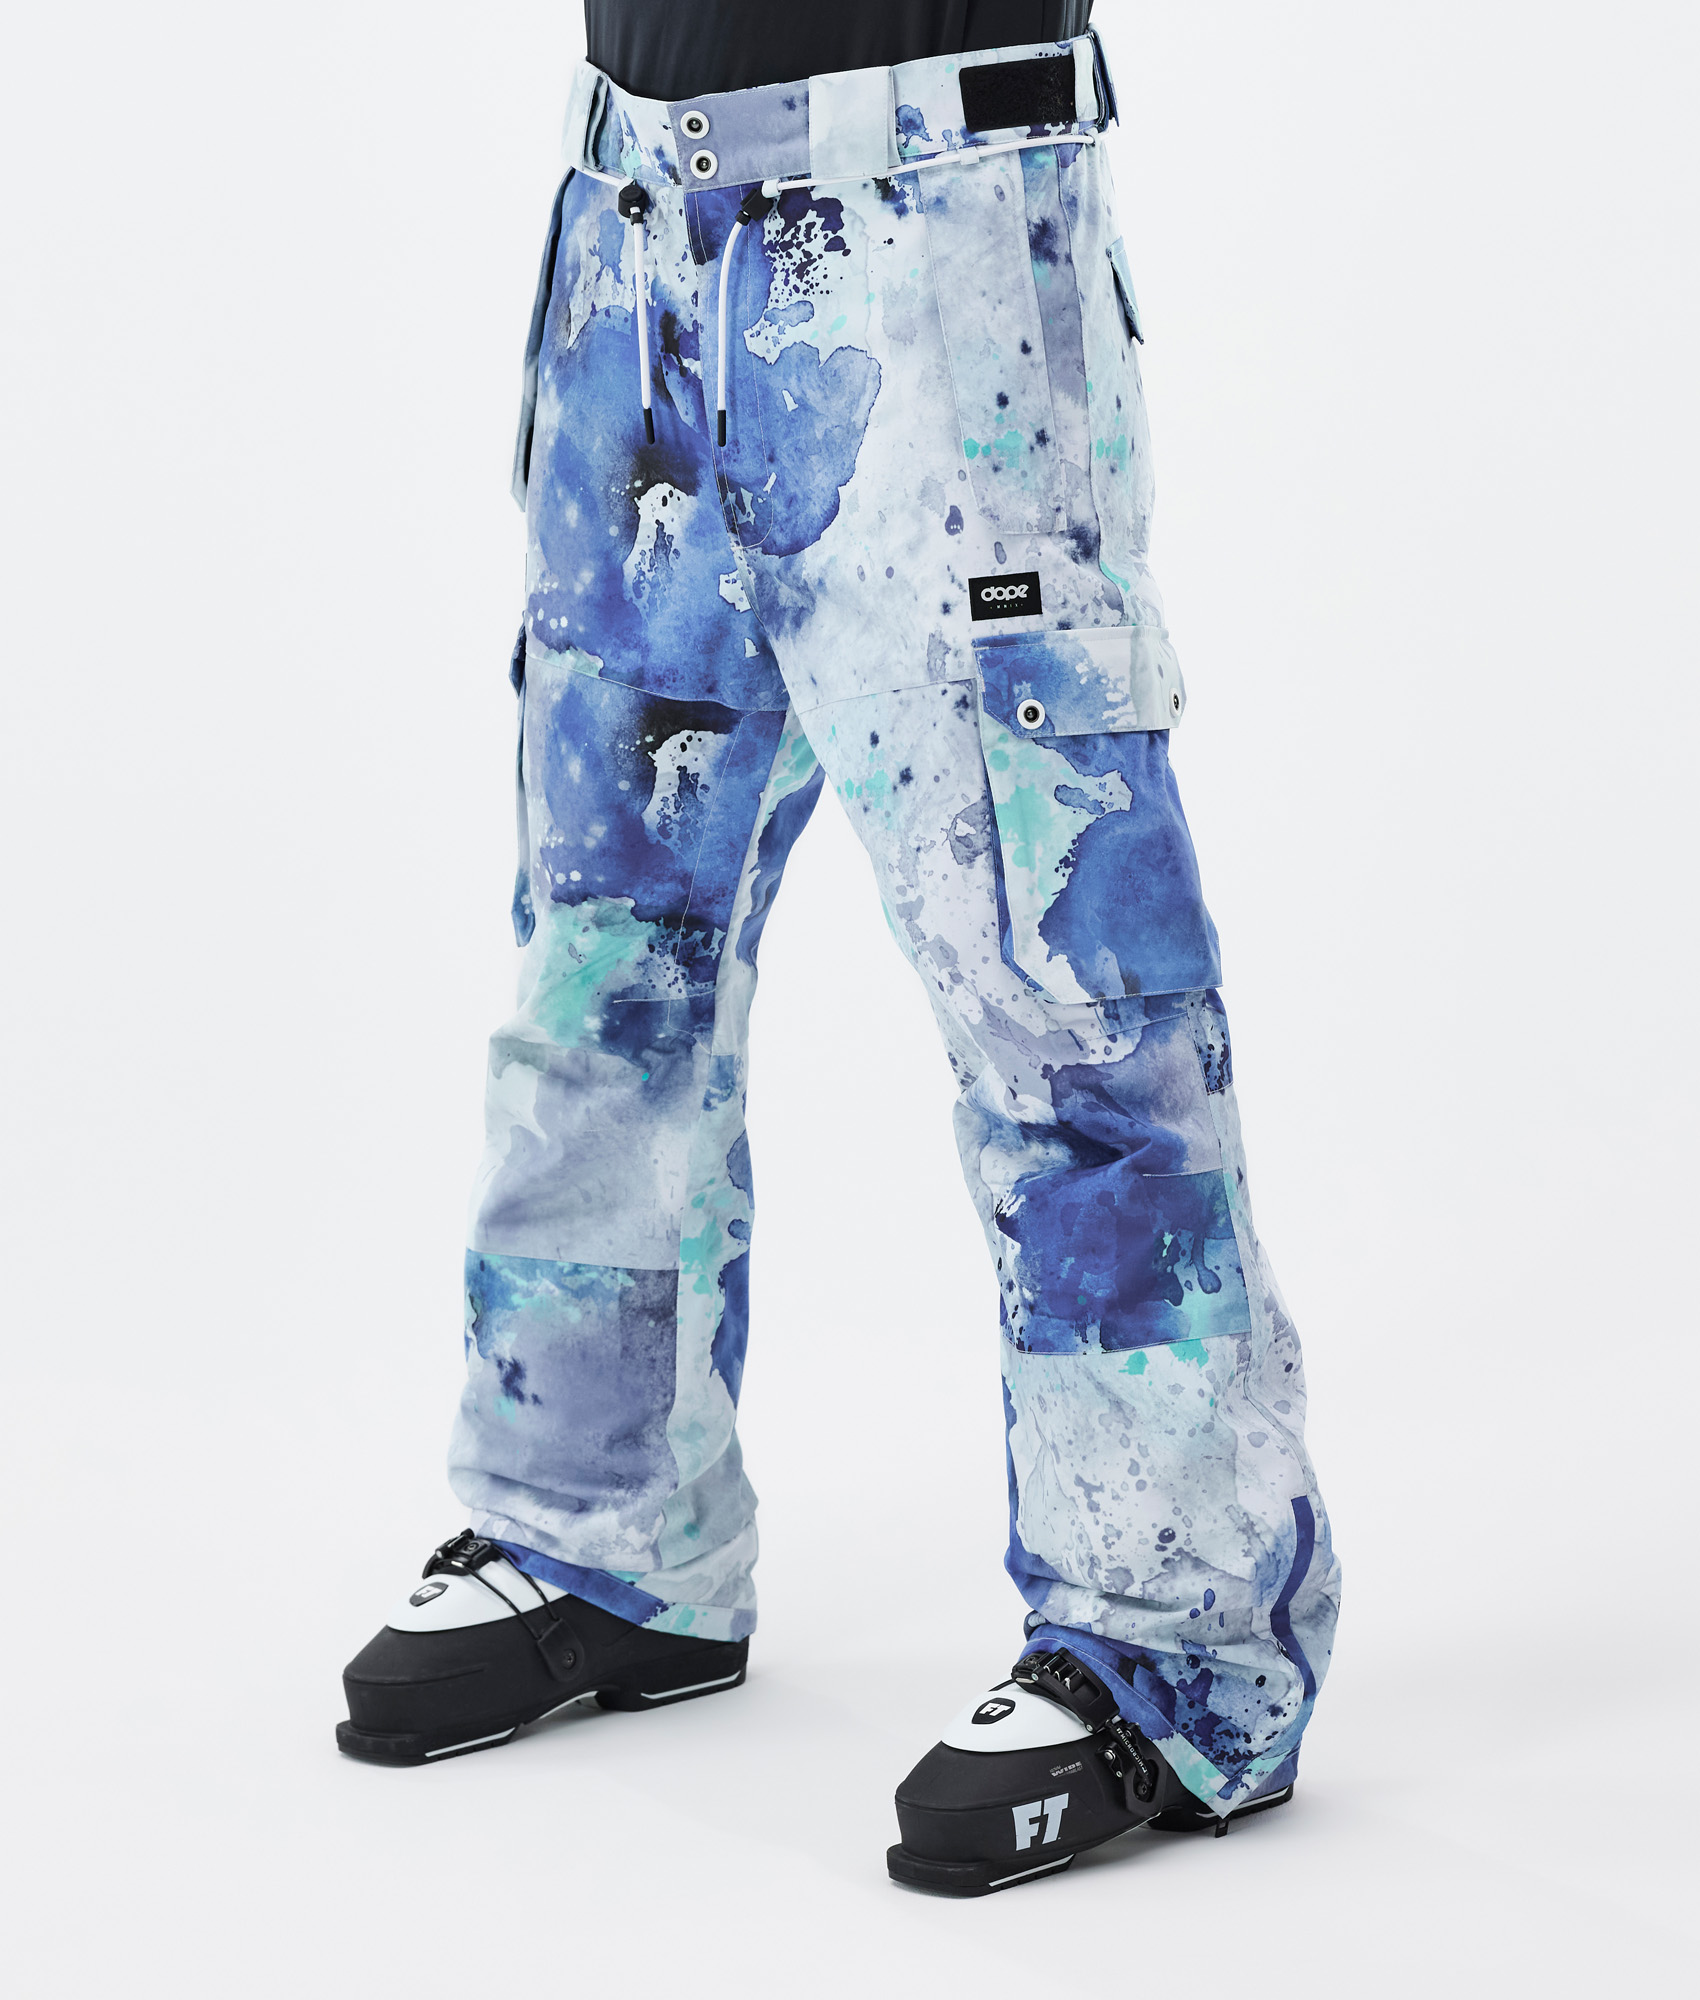 Dope Iconic Men's Snowboard Pants Faded Violet